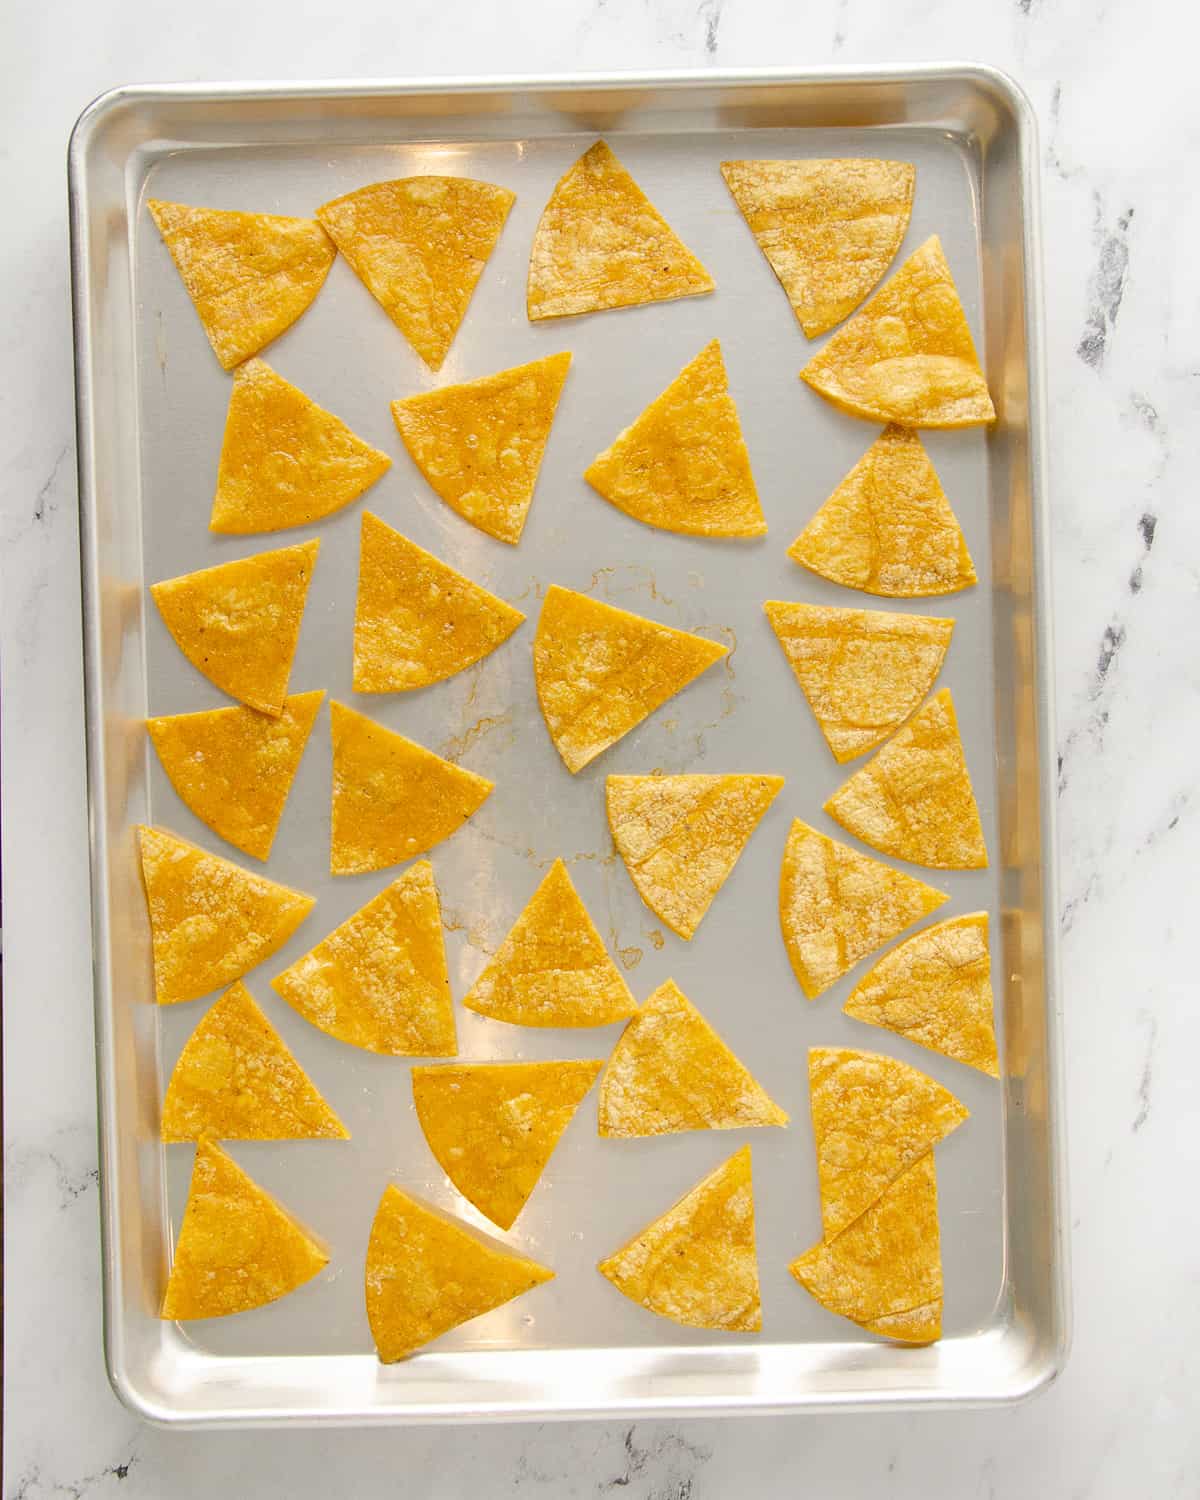 Corn tortilla chips lightly browned on both sides on a baking tray.